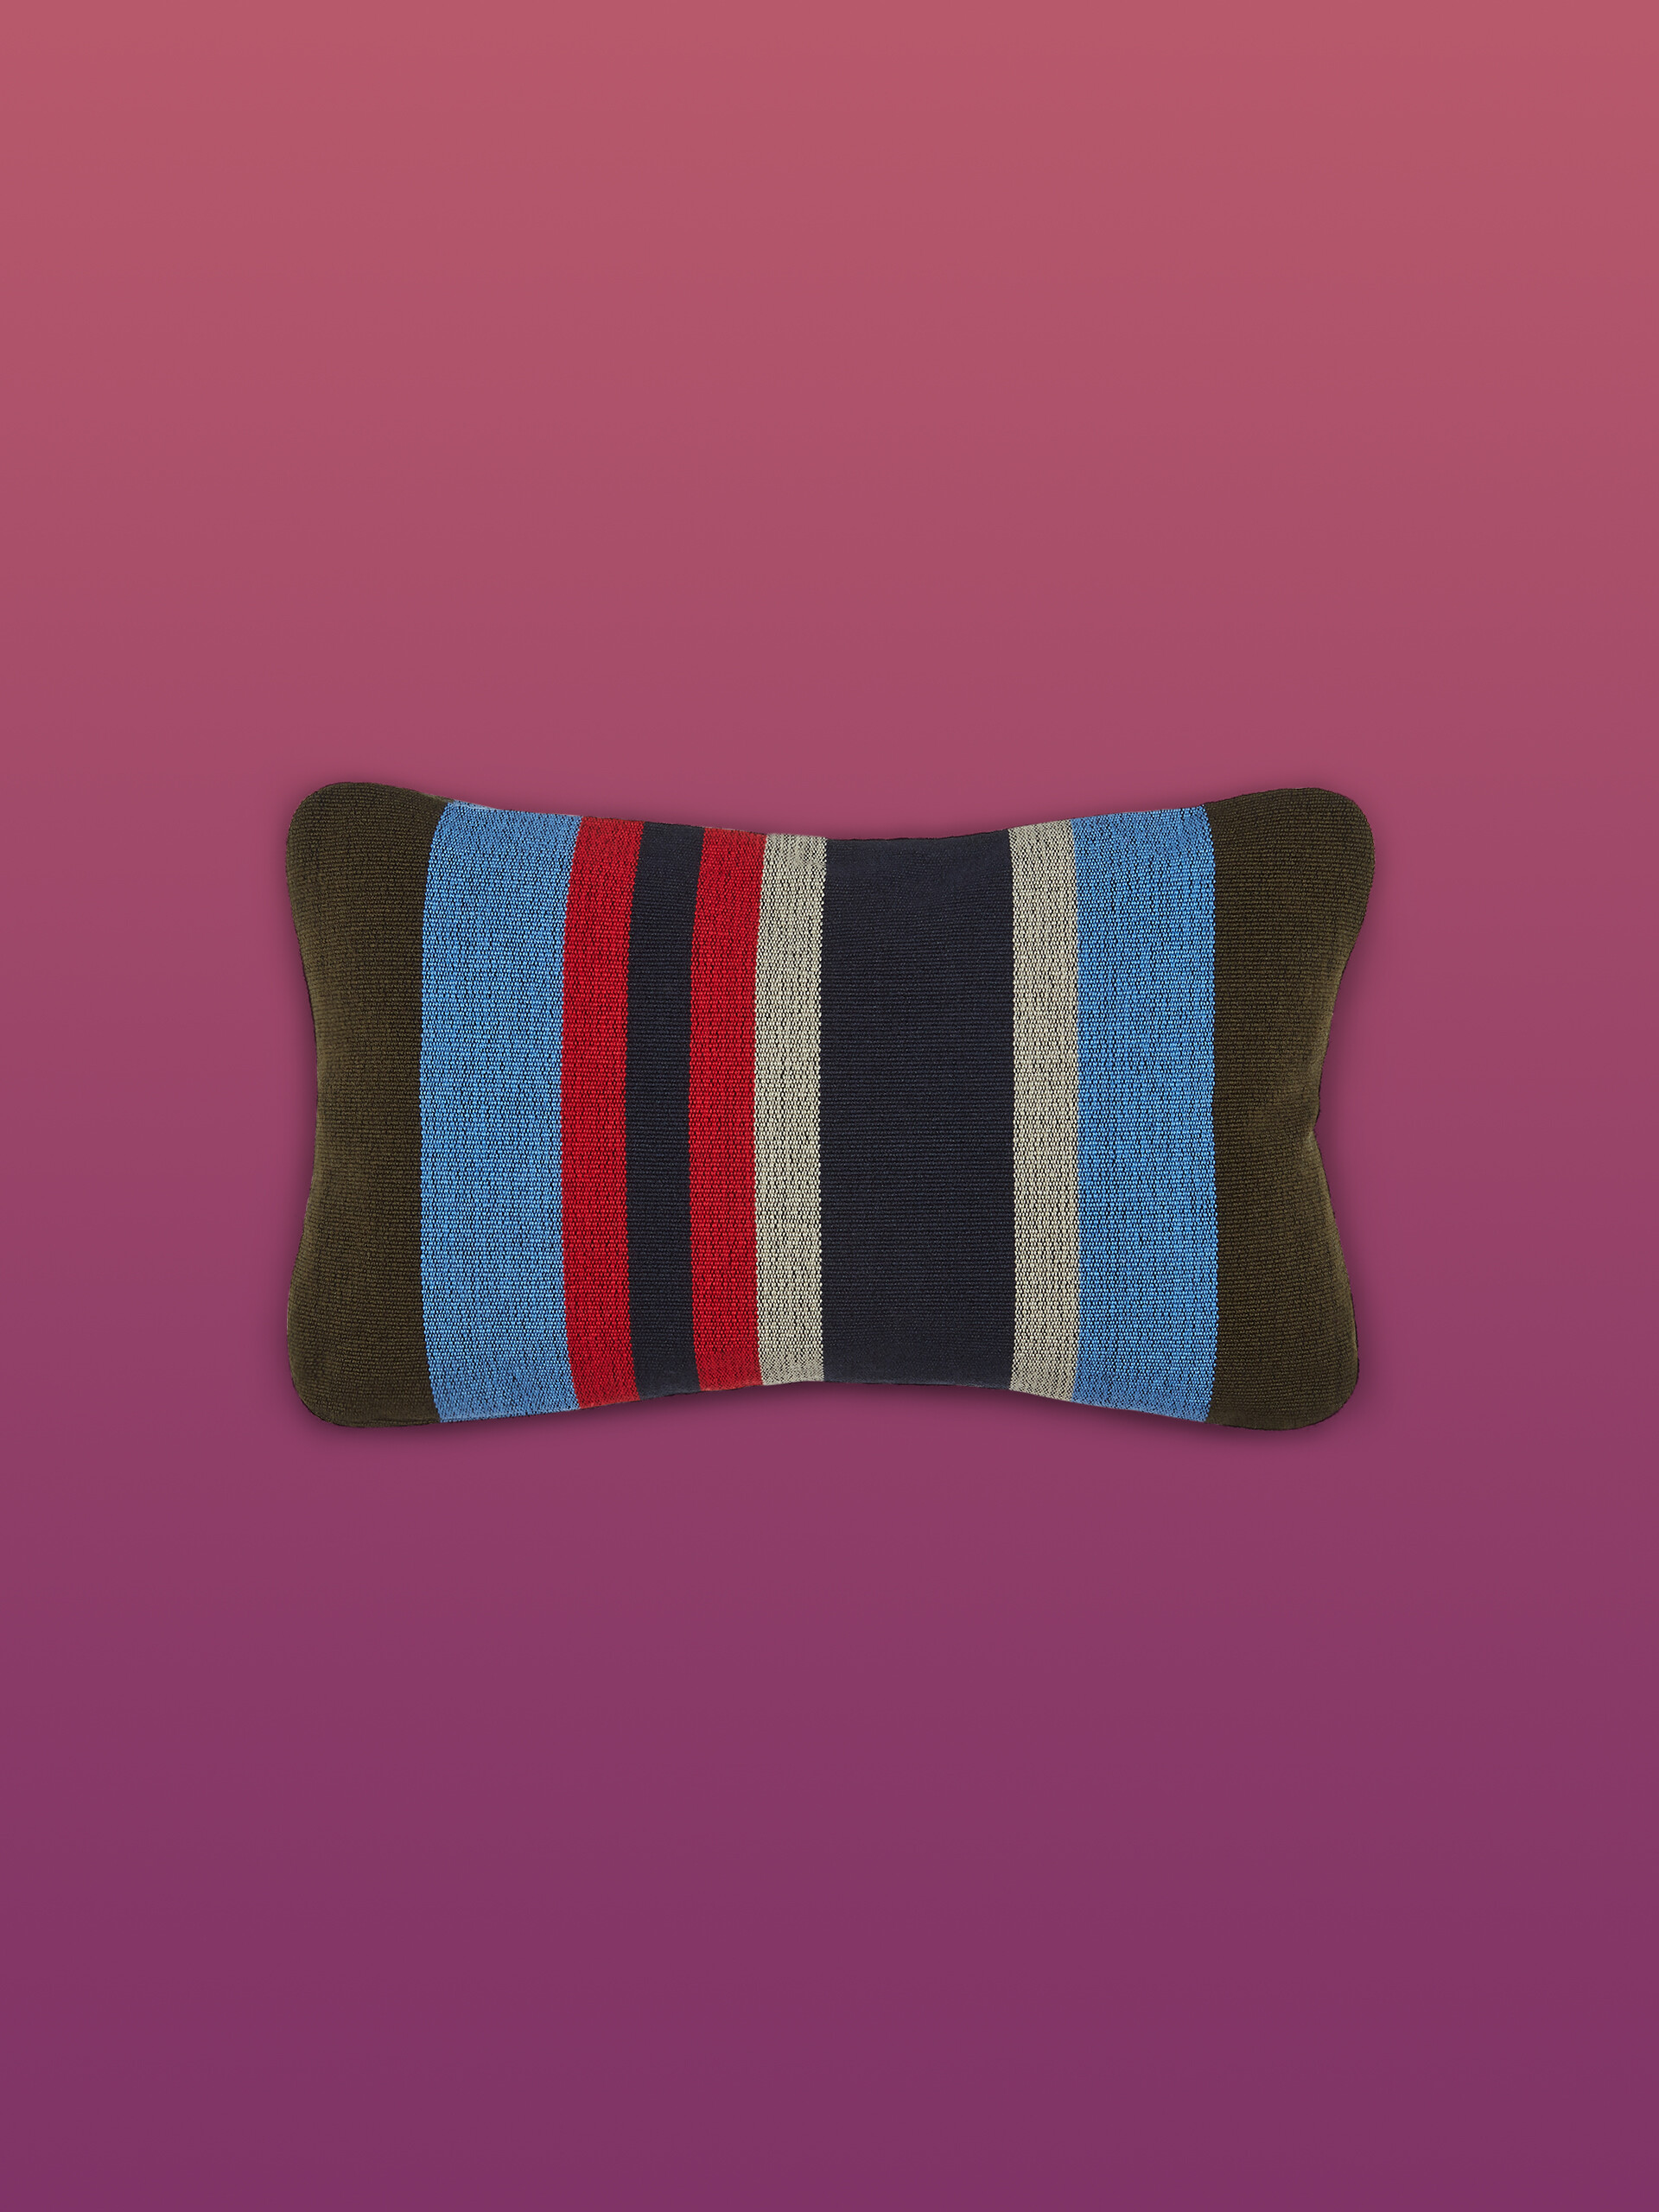 MARNI MARKET rectangular pillow cover in polyester with green pale blue and blue vertical stripes - Furniture - Image 1